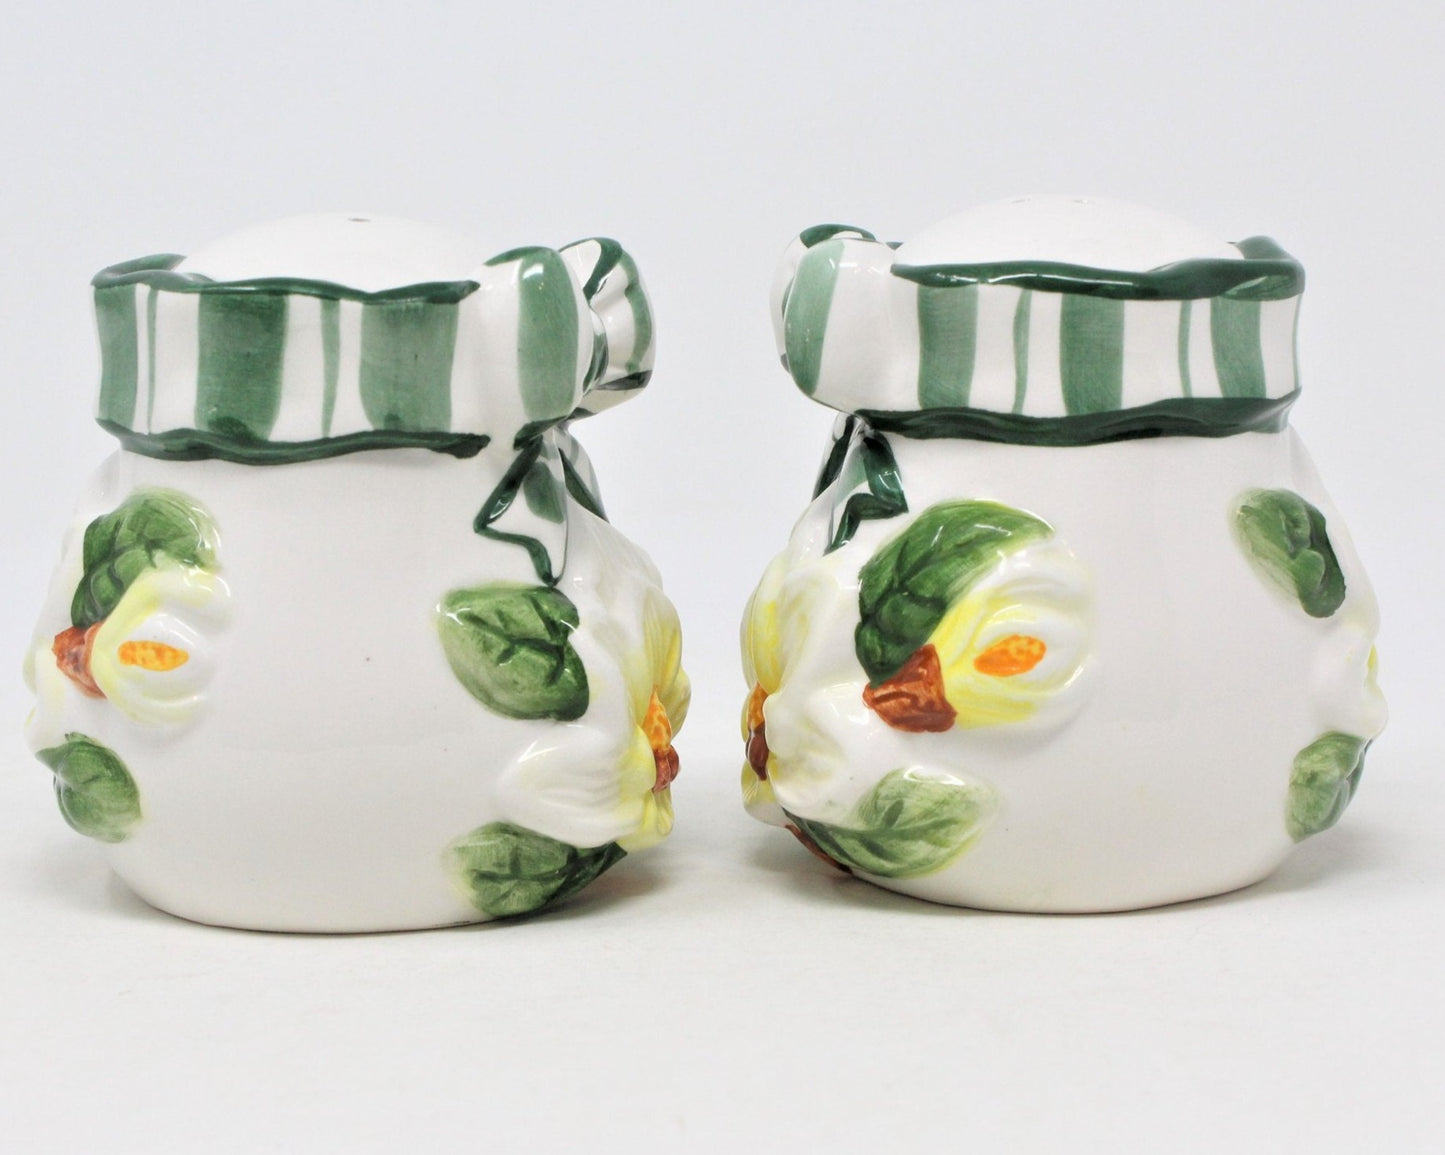 Salt and Pepper Shakers, Young's China, Magnolia and Bows, Ceramic 1996